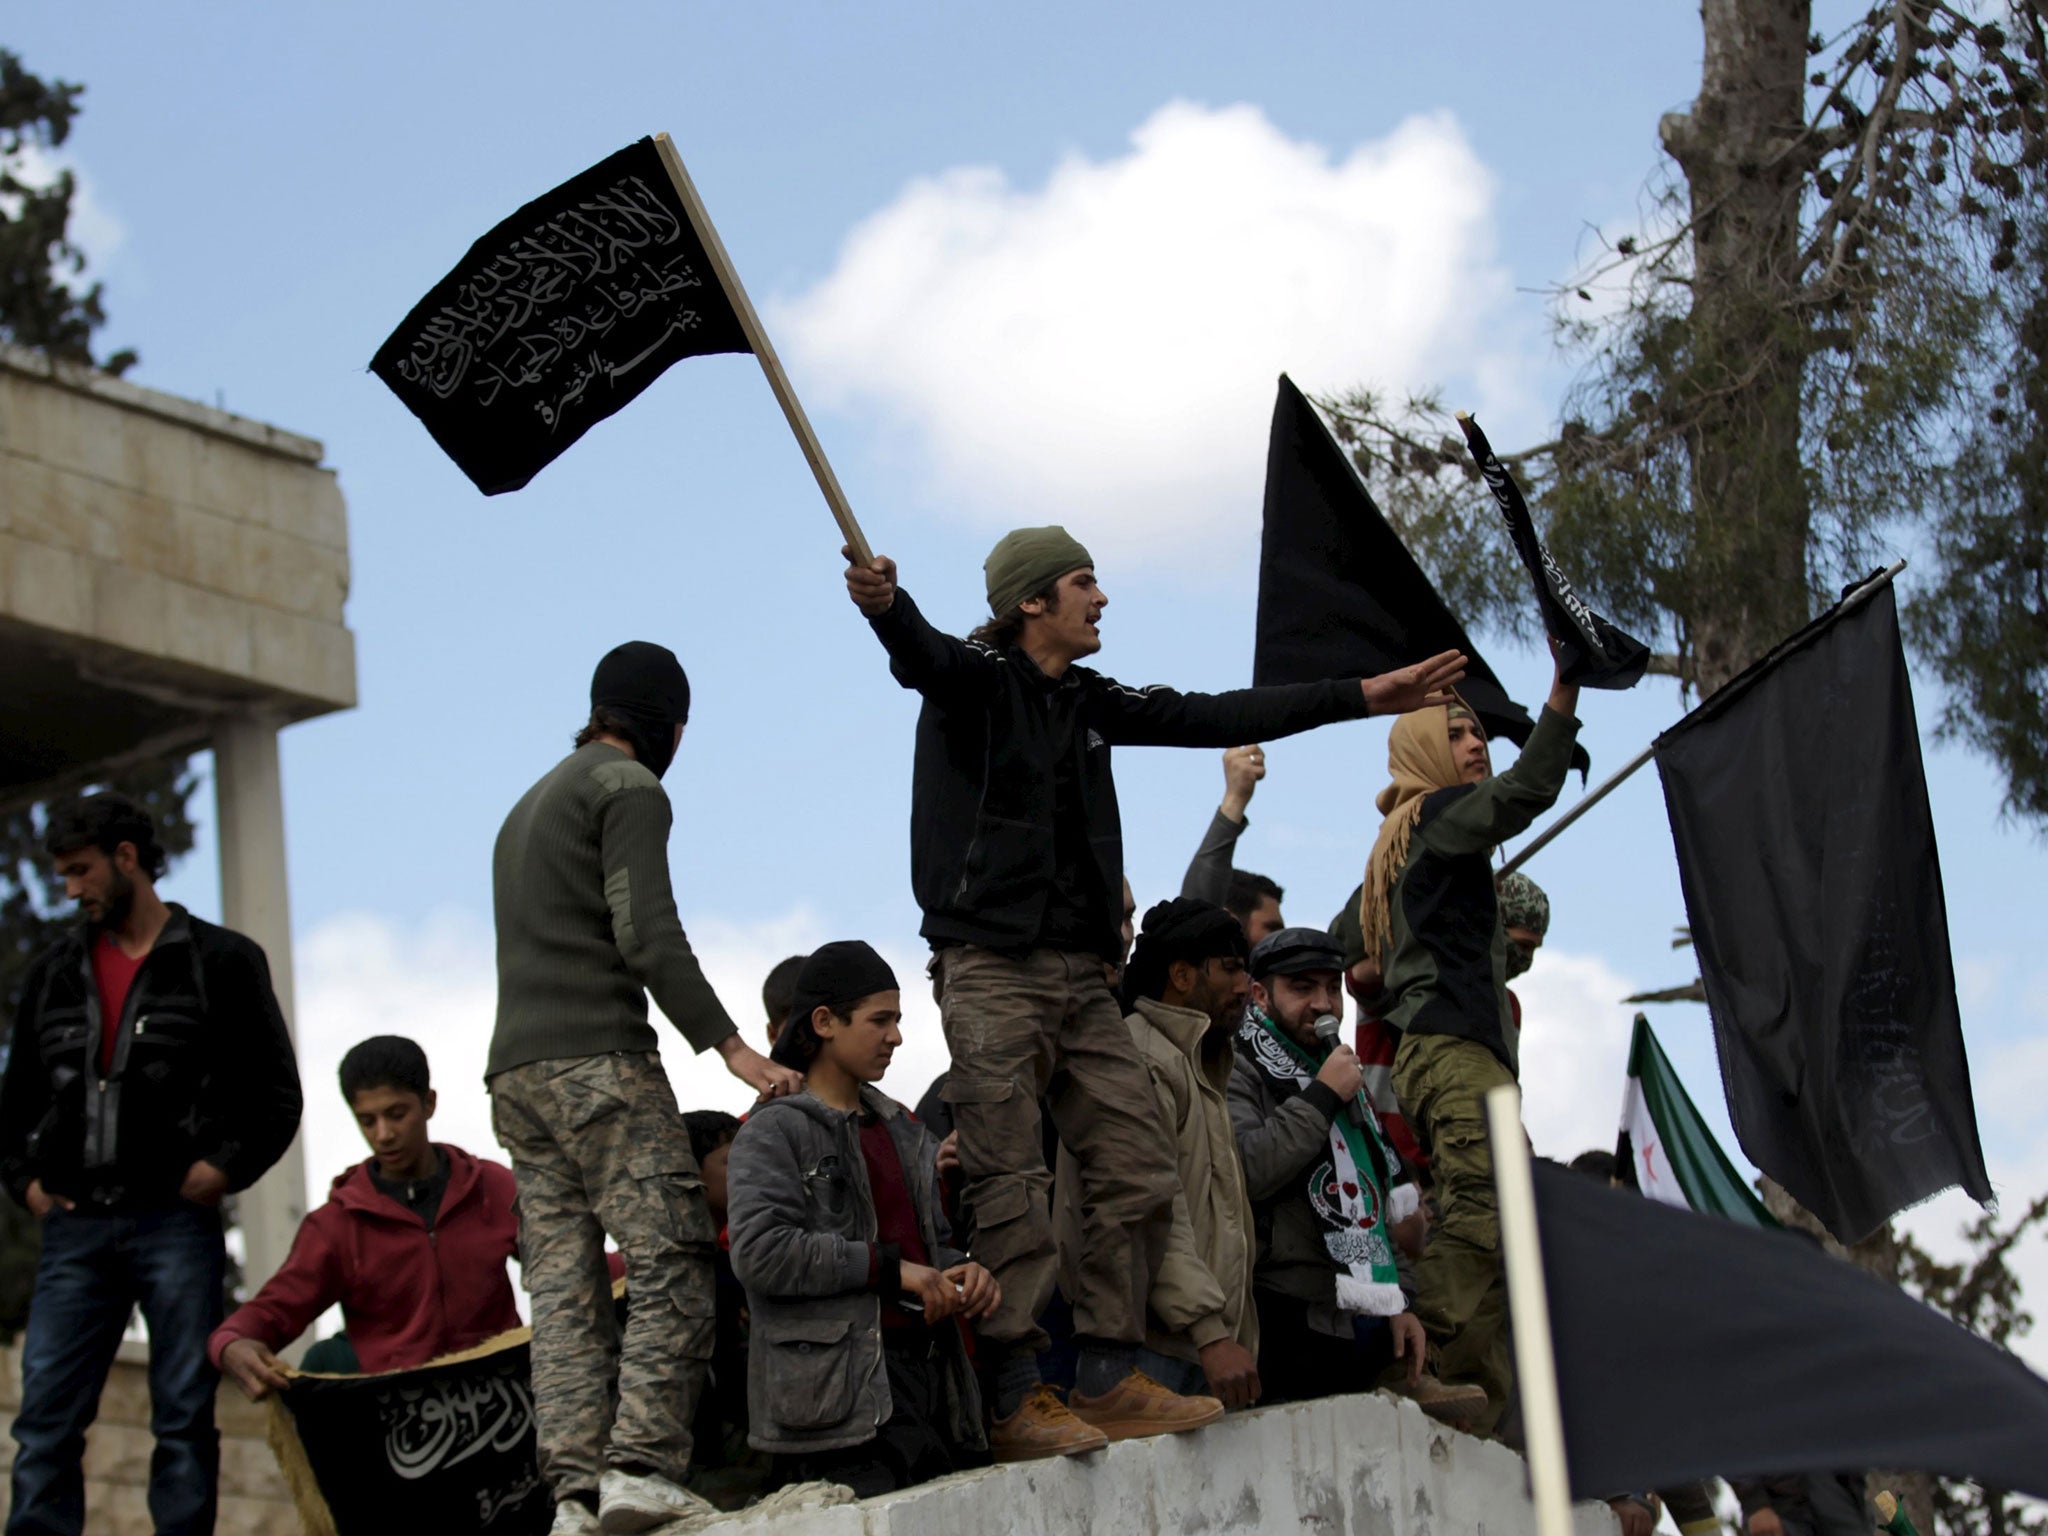 Jabhat al-Nusra supporters drowning out pro-democracy protesters